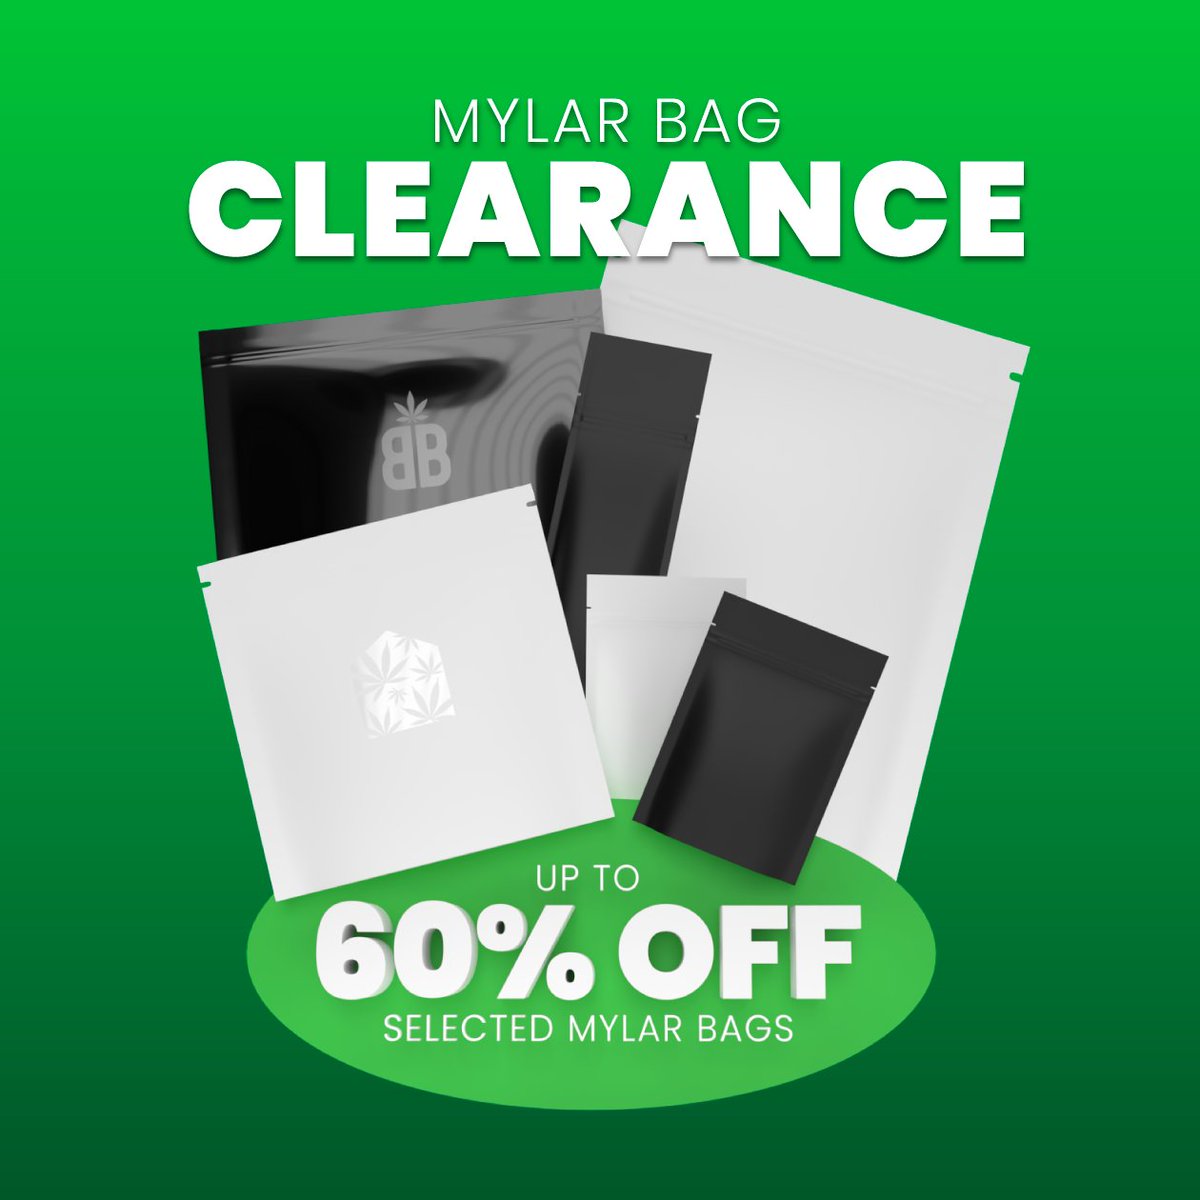 Our SPRING CLEARANCE SALE is on now! Get great deals on our clearance items, up to 60% off select products while supplies last! Take advantage while supplies last and save on your packaging products at dispensarysupply.ca/clearance/
#mylar #bags #mylarbags #cannabis #cannabispackaging